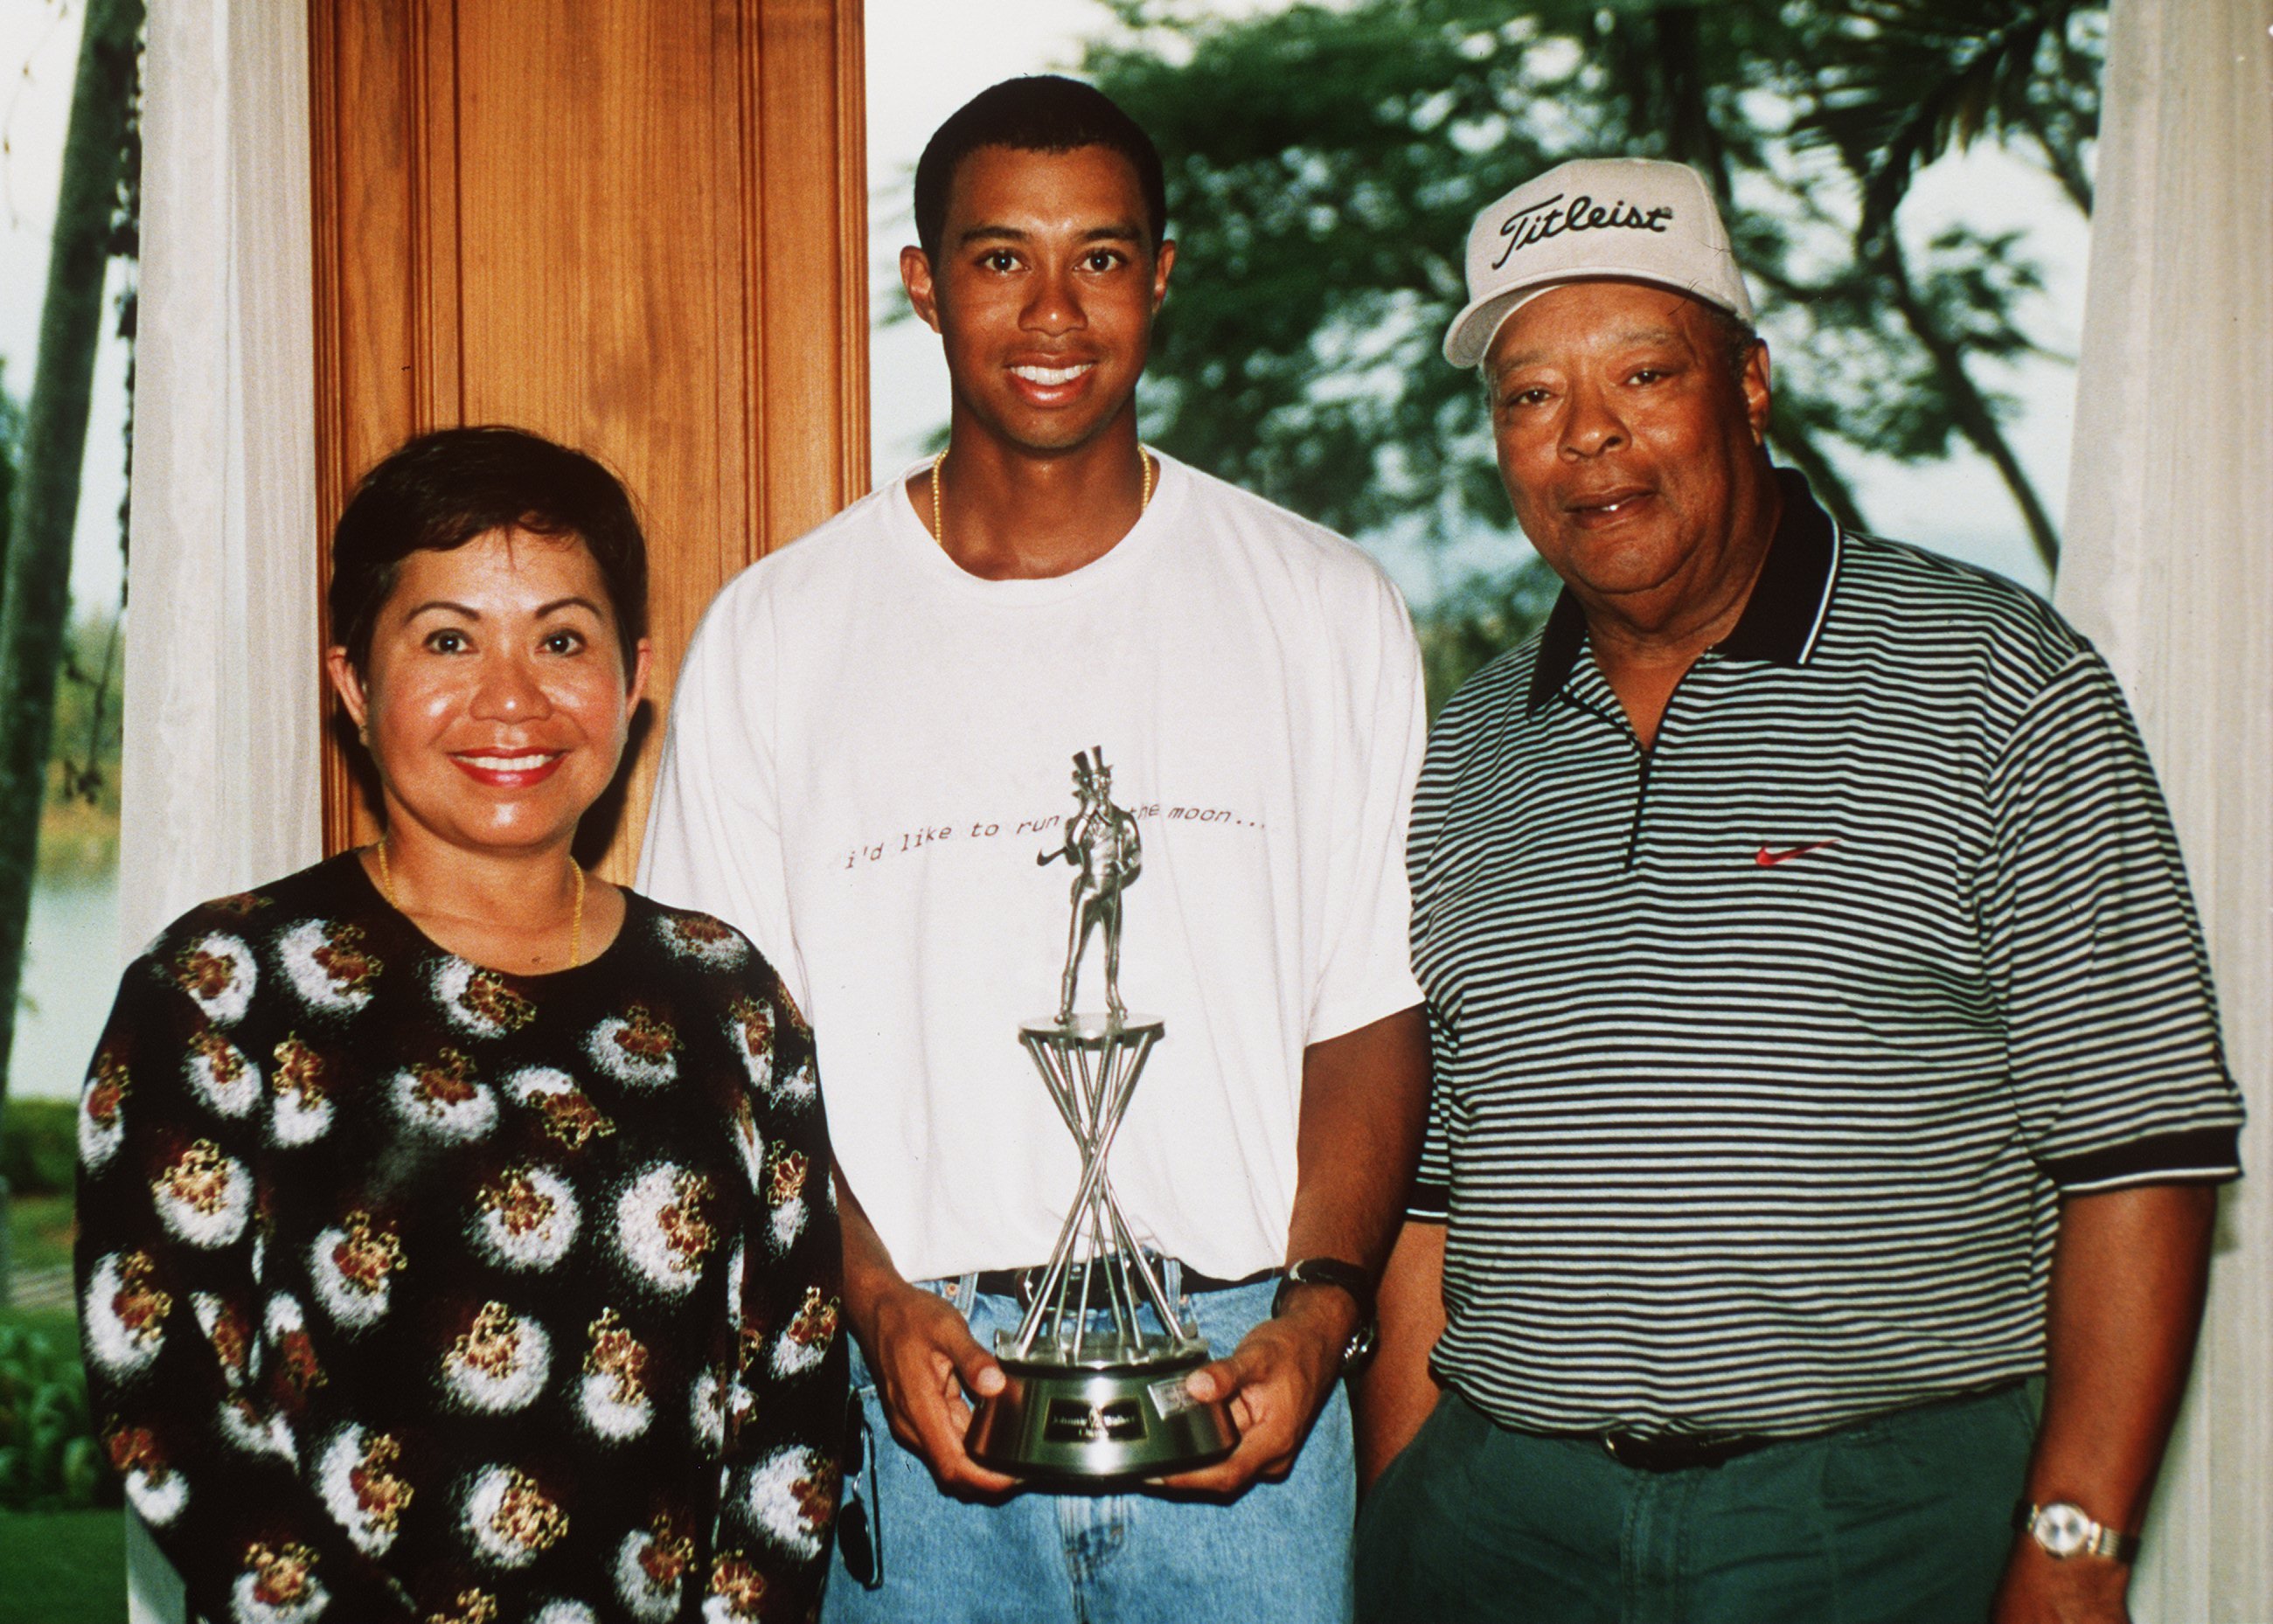 Tiger Woods with his parents Kultida Woods and Earl Woods at the Johnnie Walker Classic at Blue Canyon Golf Club, Thailand, on January 25, 1998. | Source: Getty Images